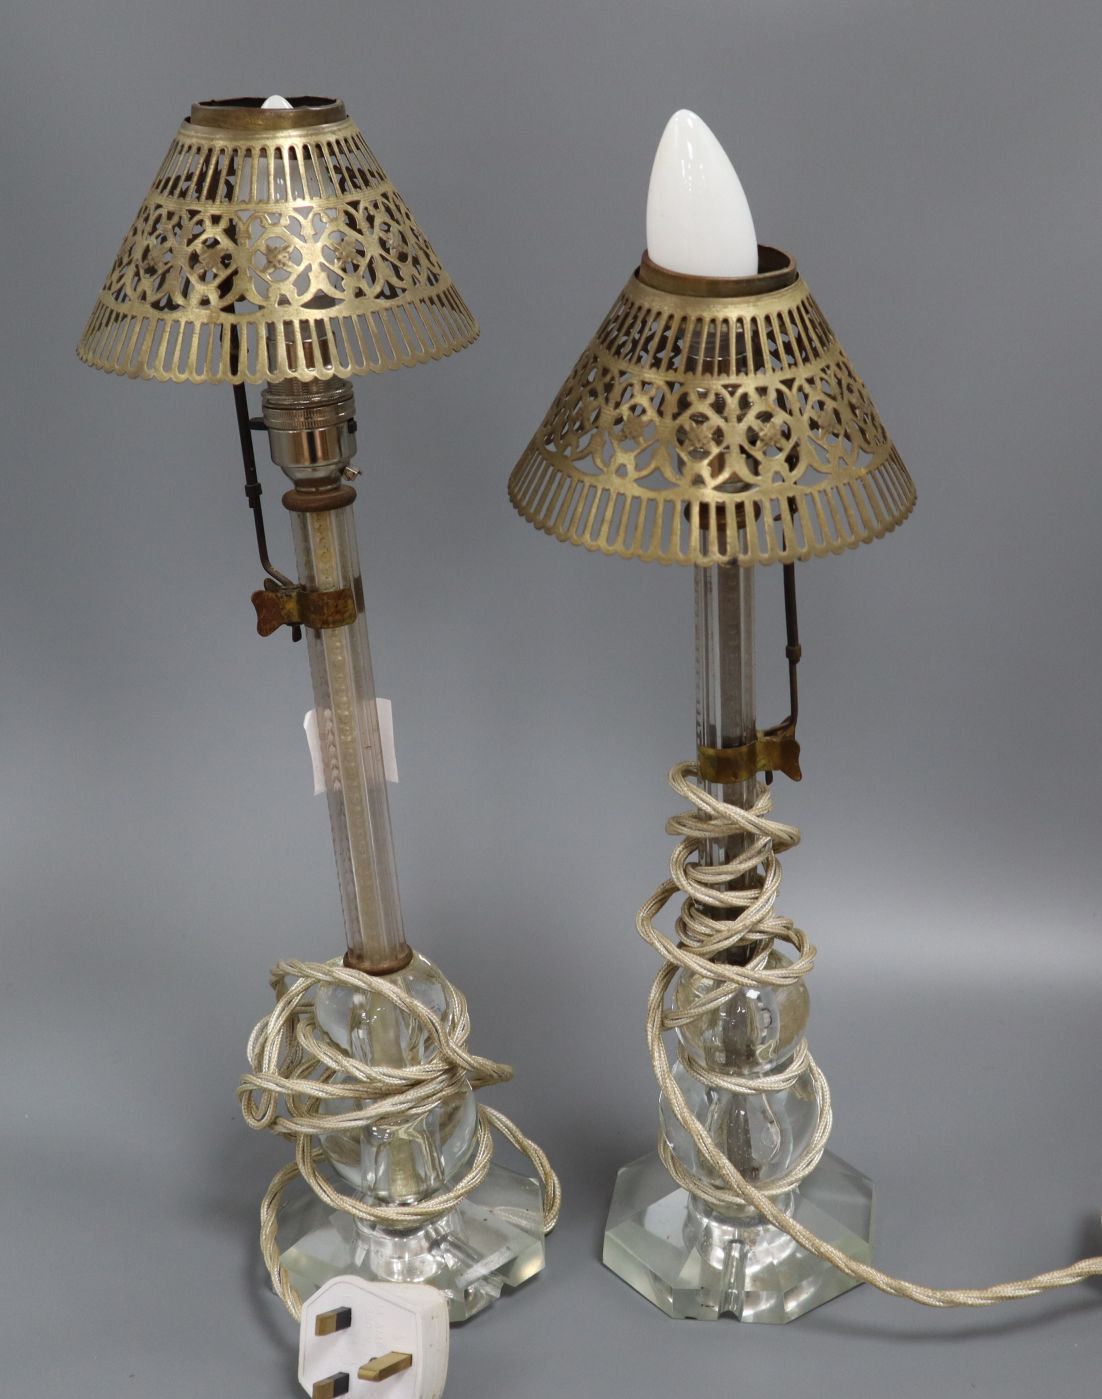 A pair of early 20th century prismatic cut glass table lamps, with metal shades - Image 2 of 2